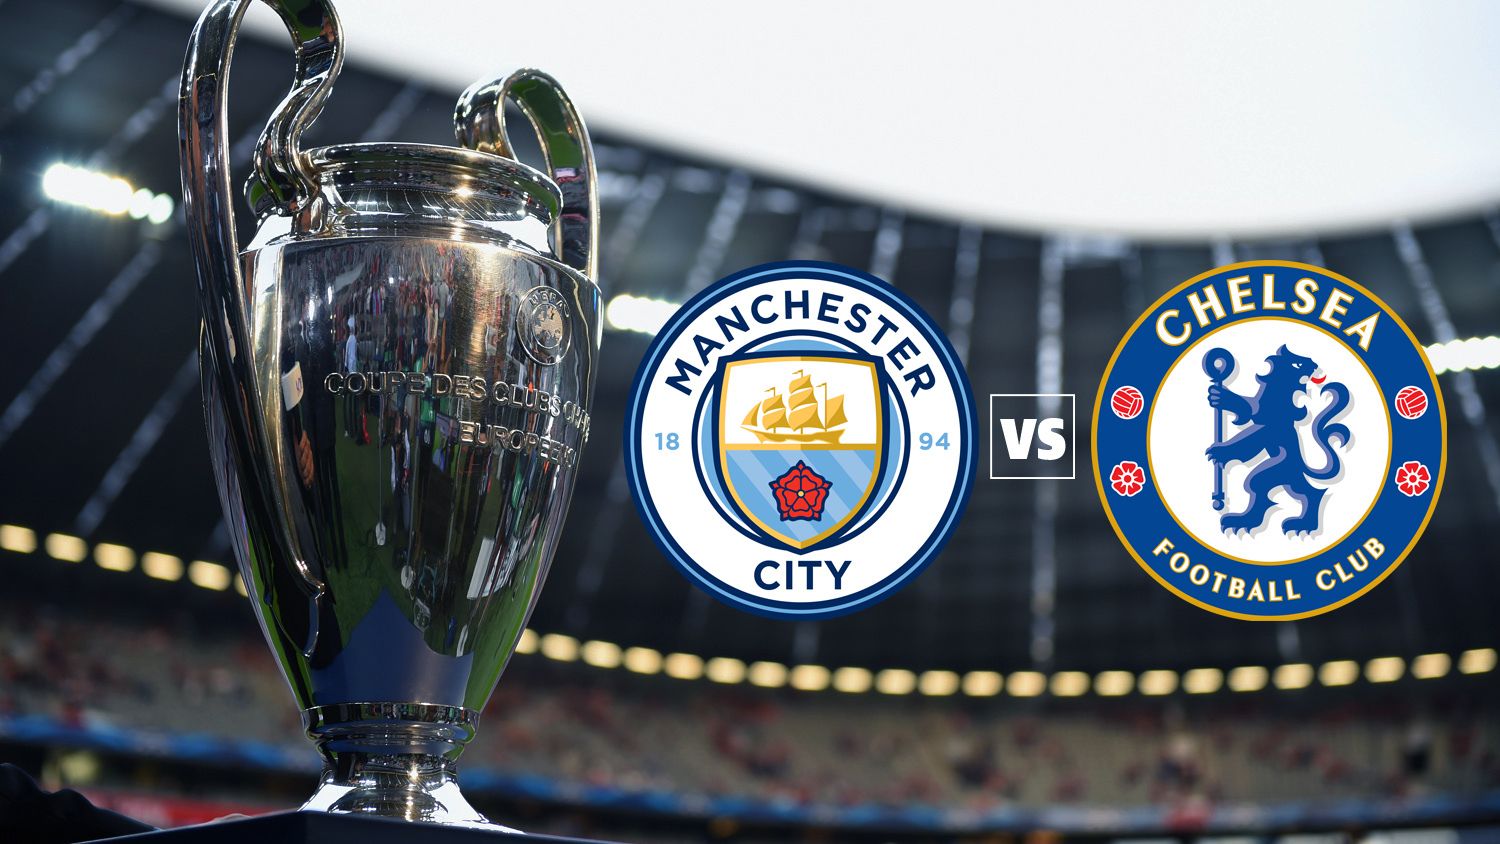 Champions League Final Free Live Stream: Watch Man City Vs Chelsea In 4K On TV, Or Free YouTube. What Hi Fi?